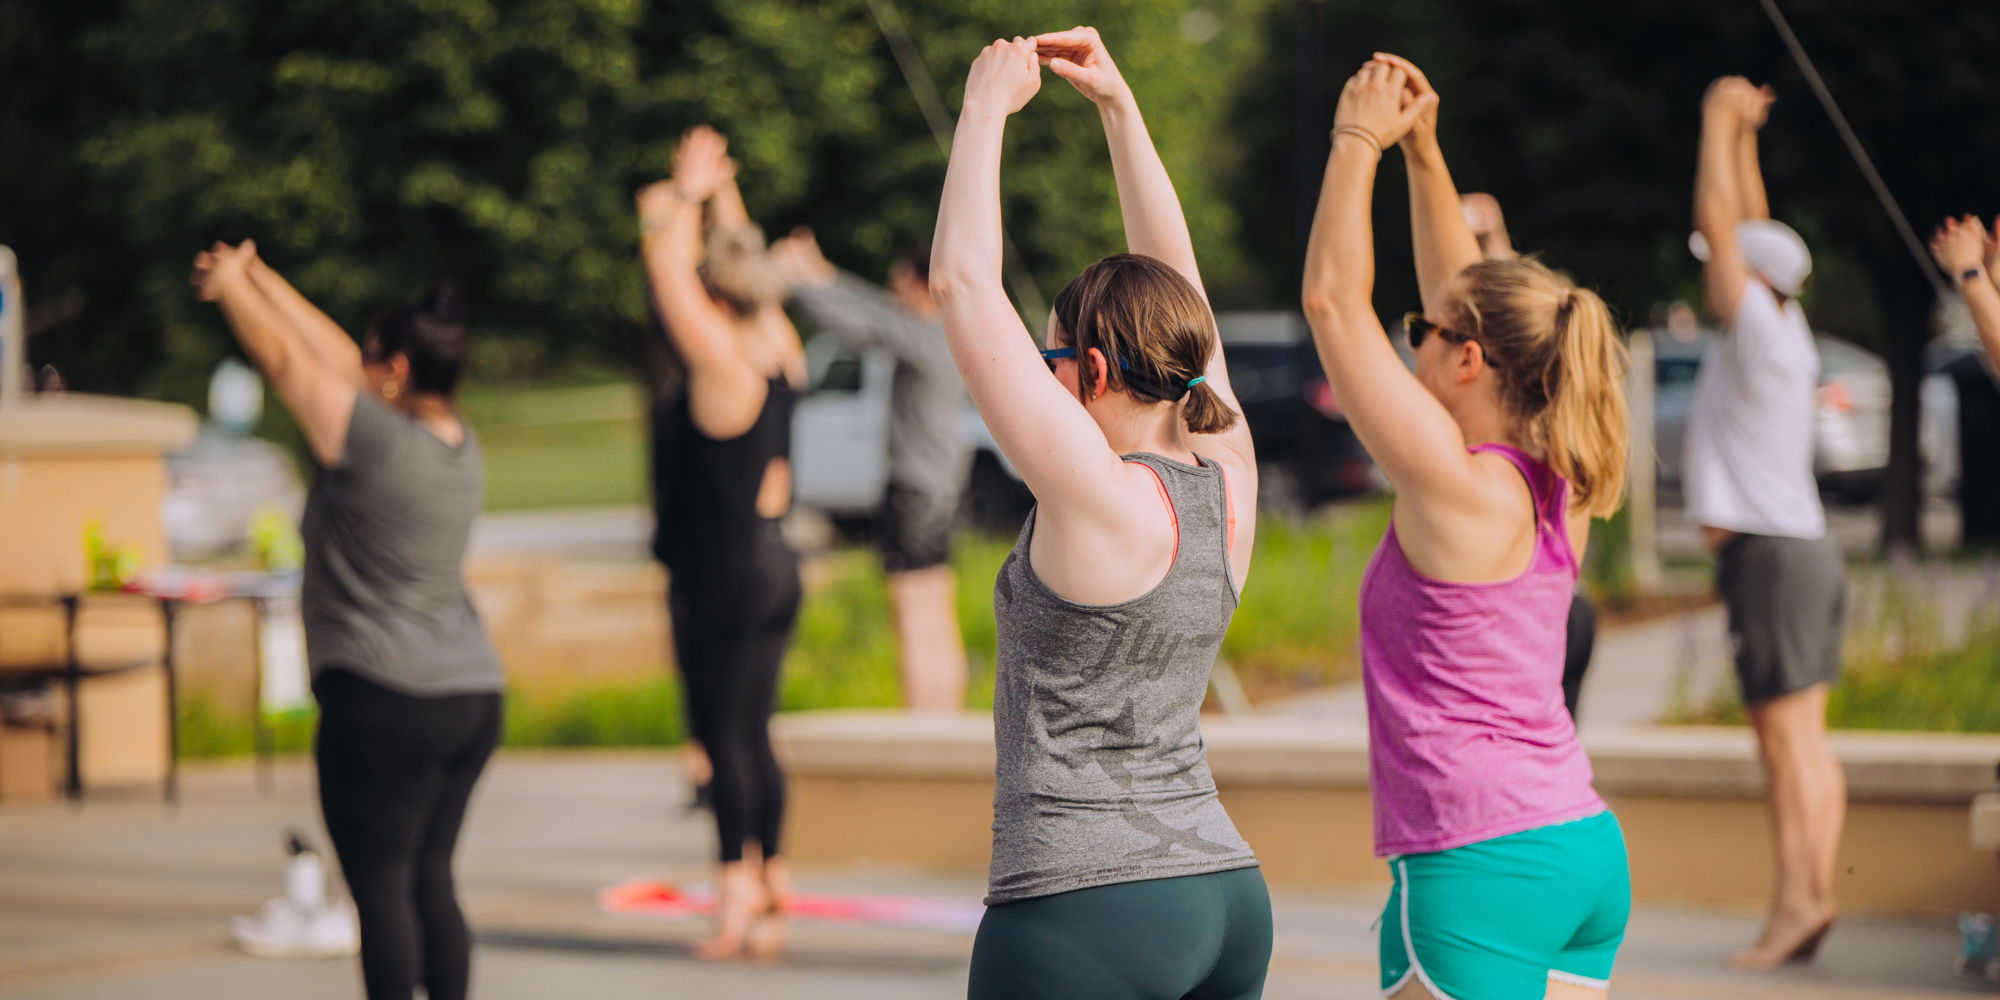 Yoga in the Park, presented by Methodist Health System promotional image